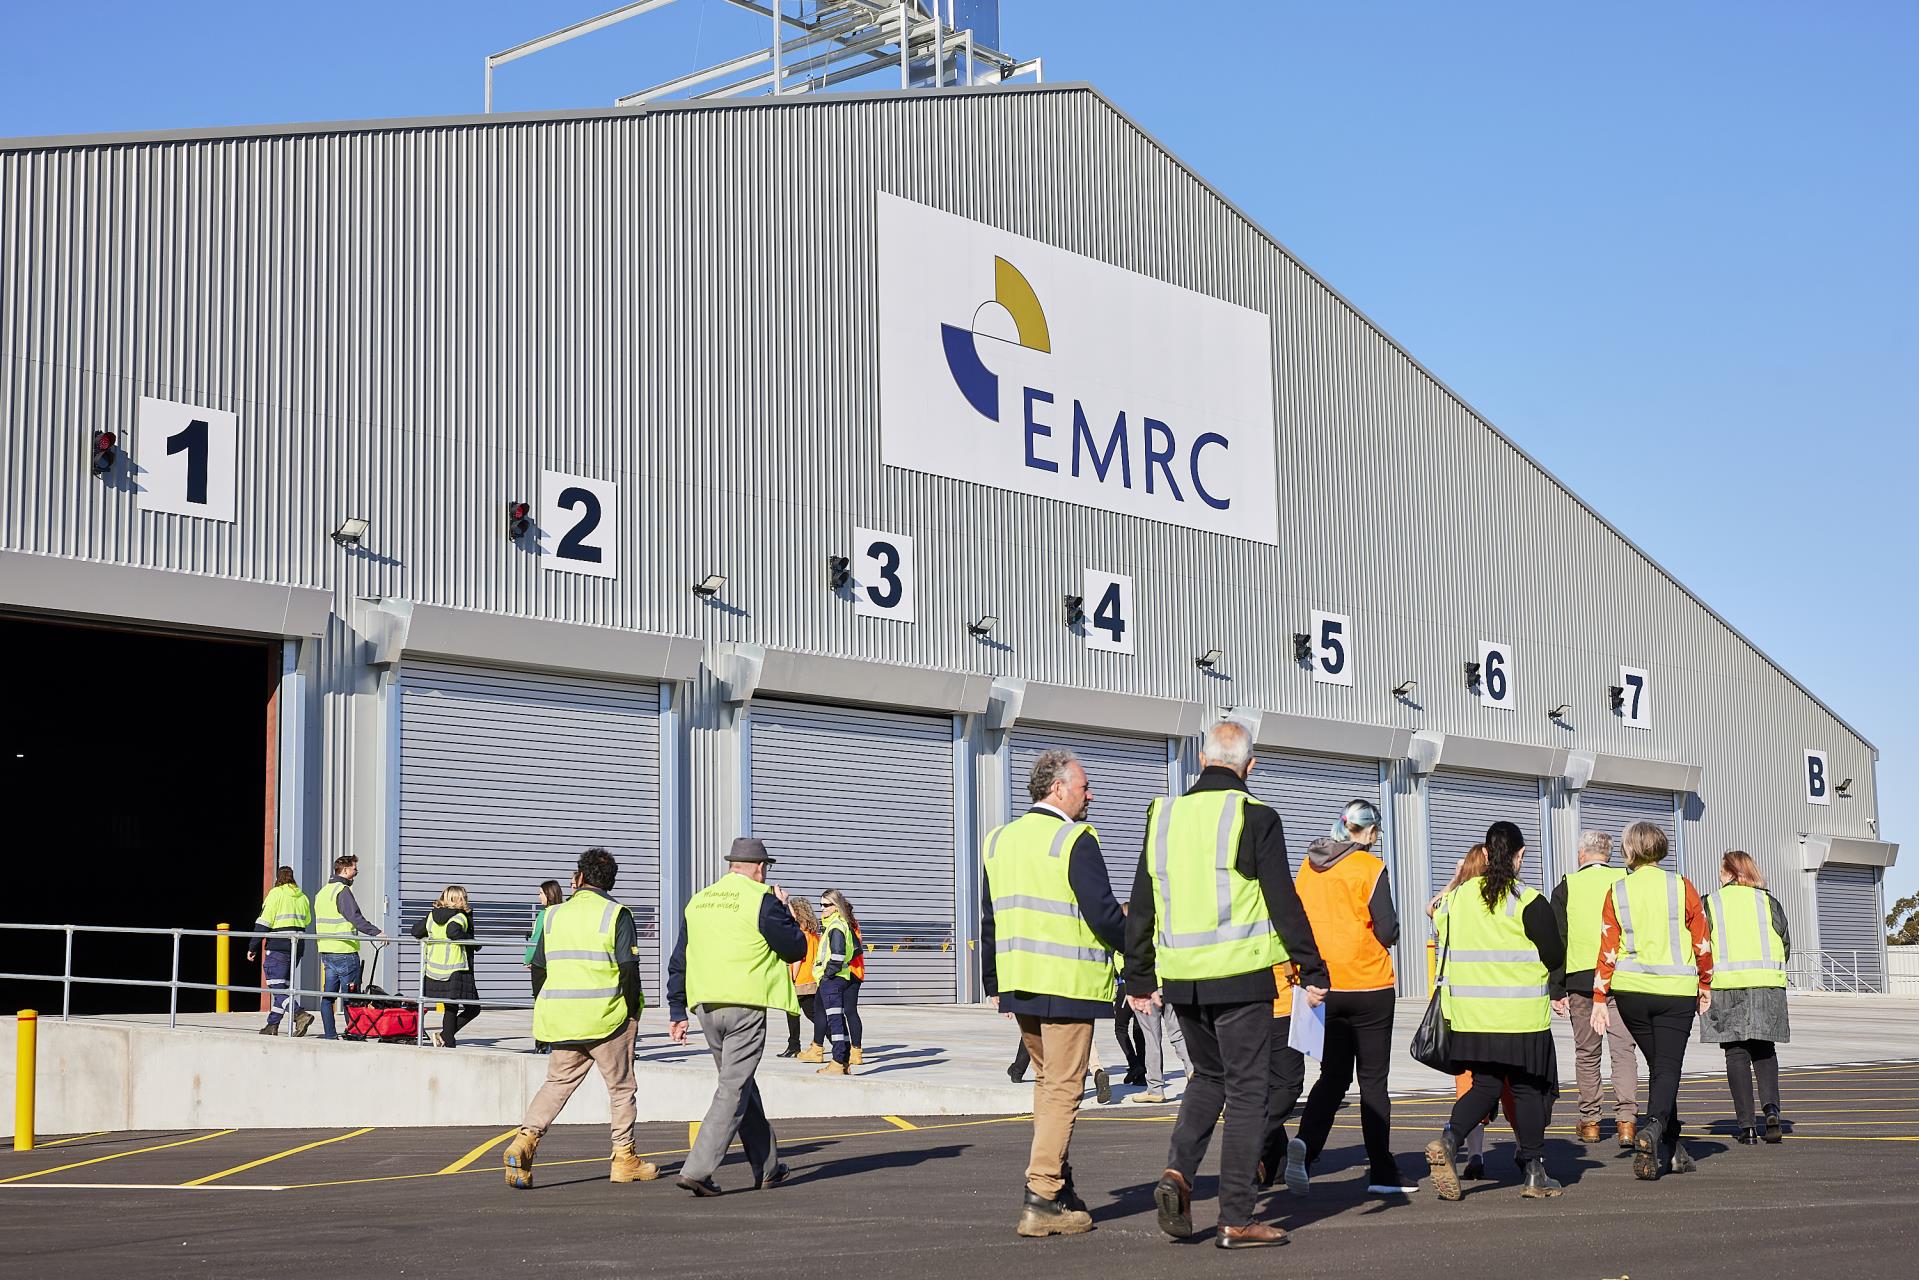 The EMRC welcomes opening of the new Waste Transfer Station at the